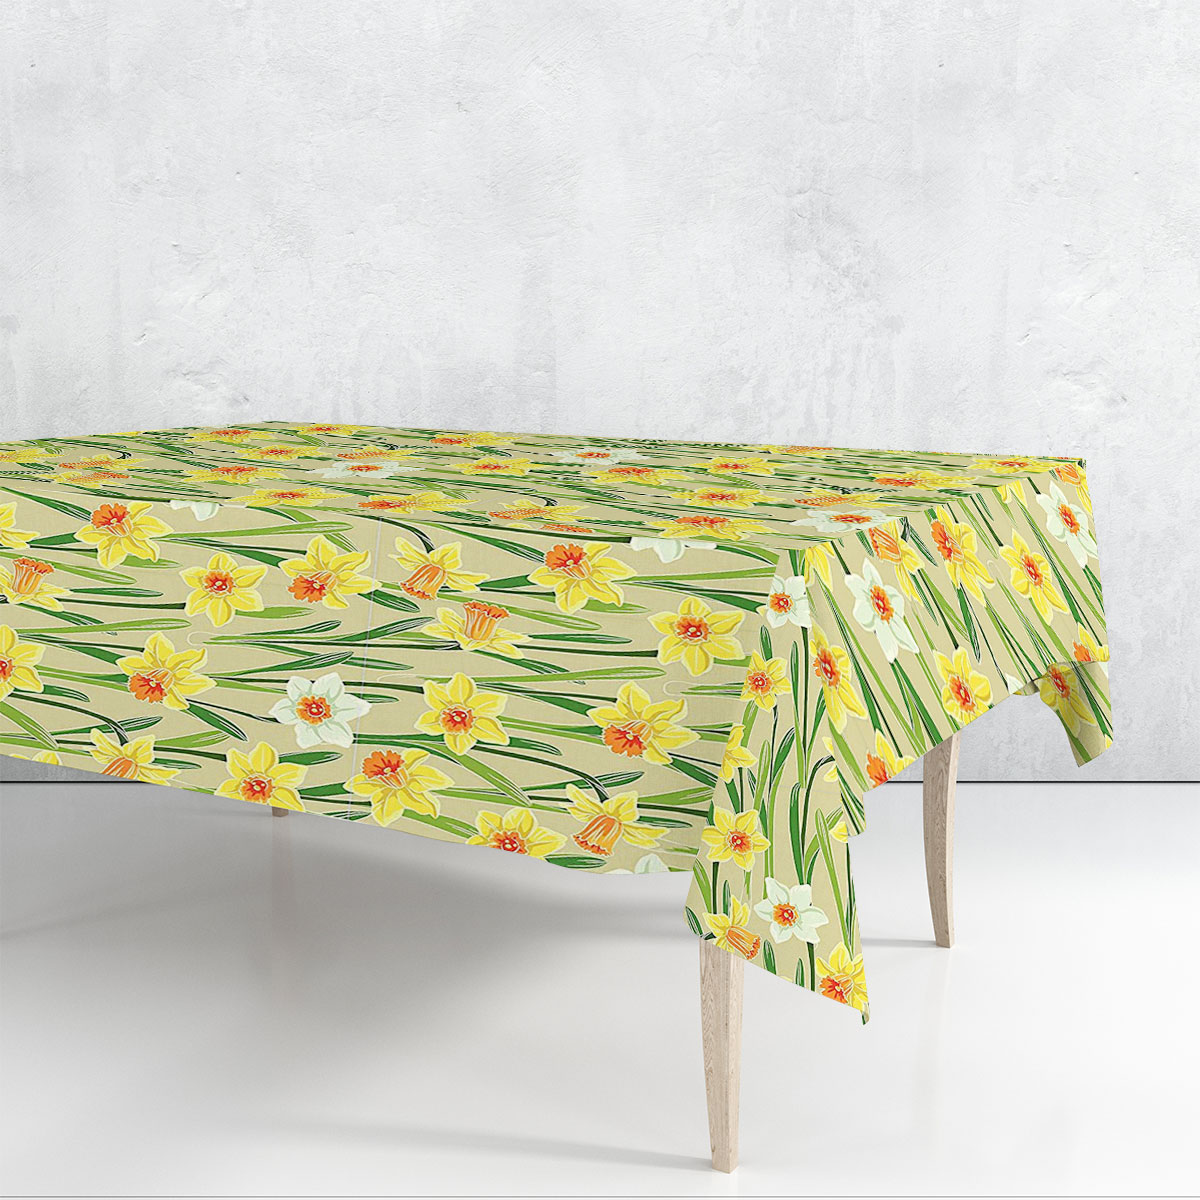 Yellow Jonquil Daffodil Narcissus Rectangle Tablecloth